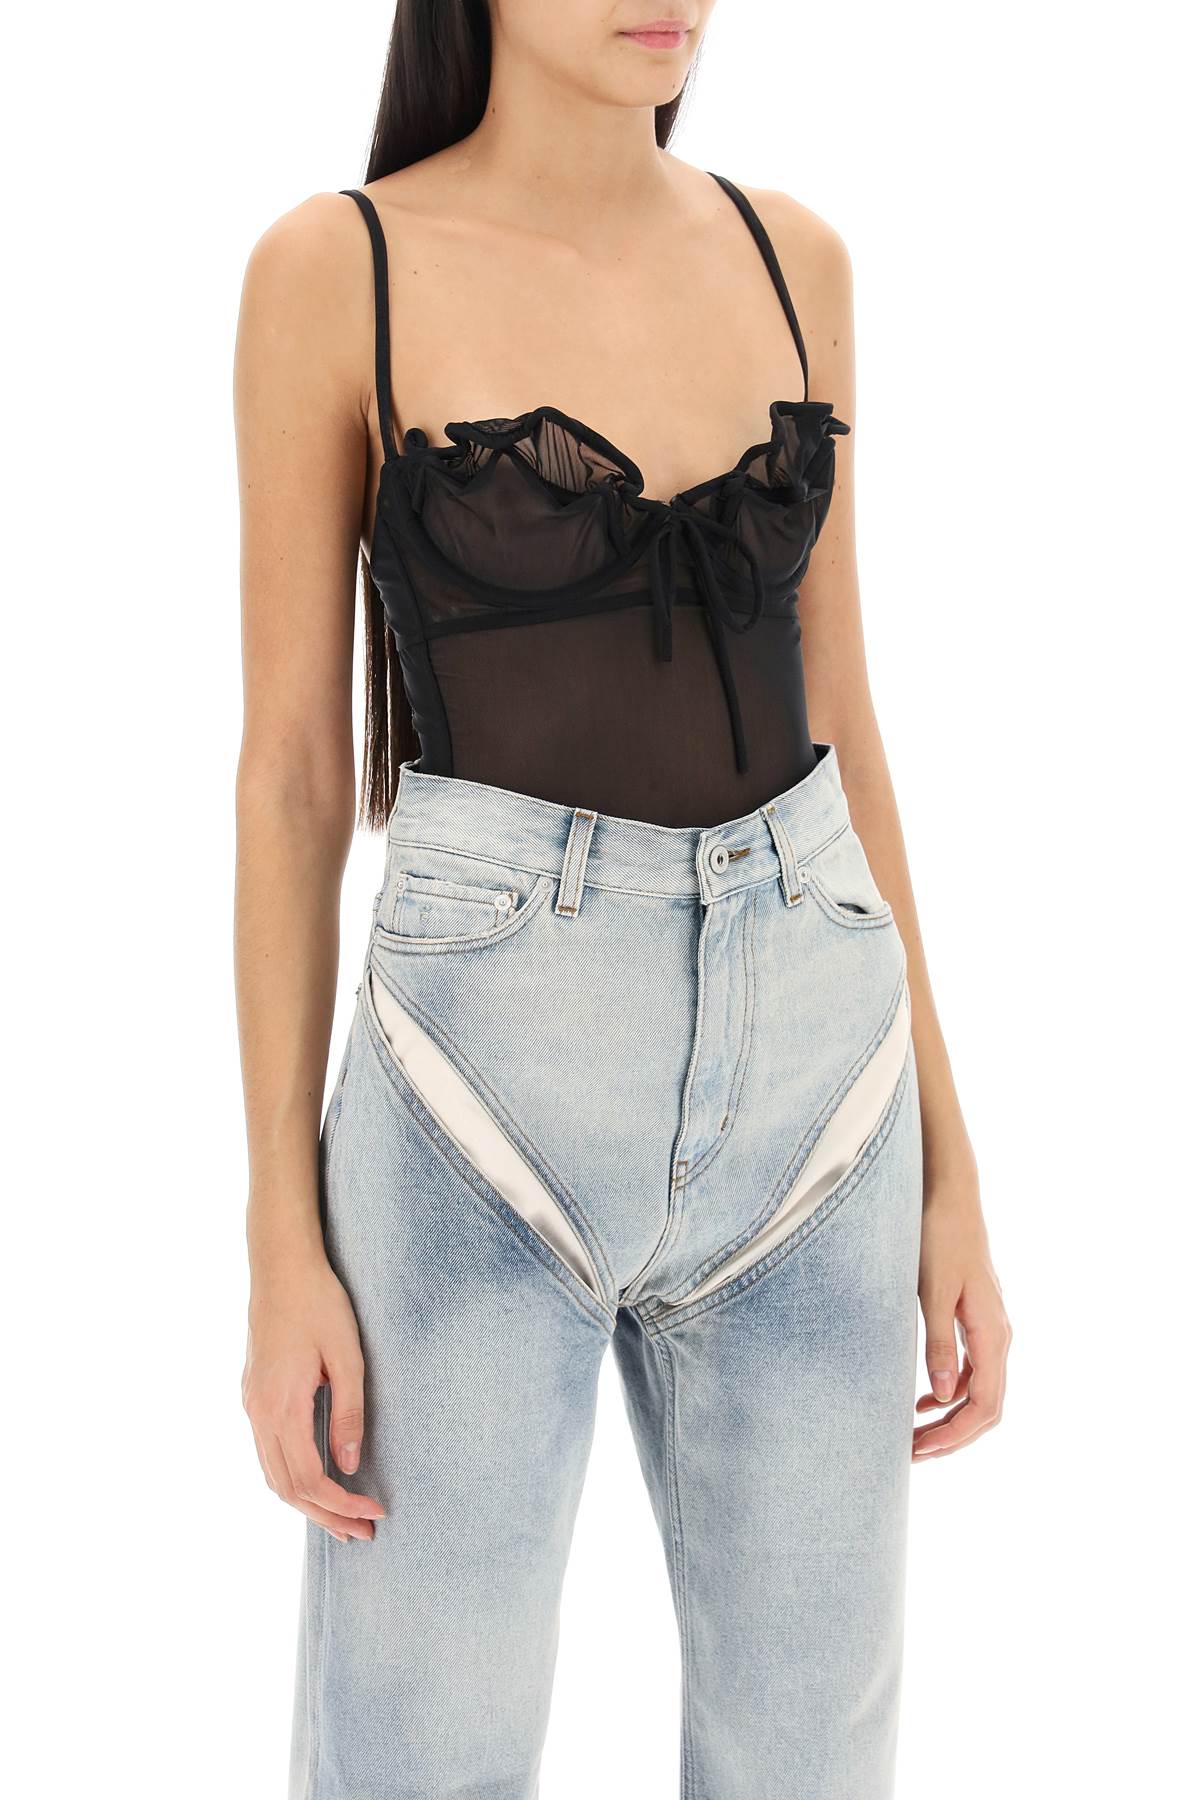 Y project wired mesh bodysuit-1